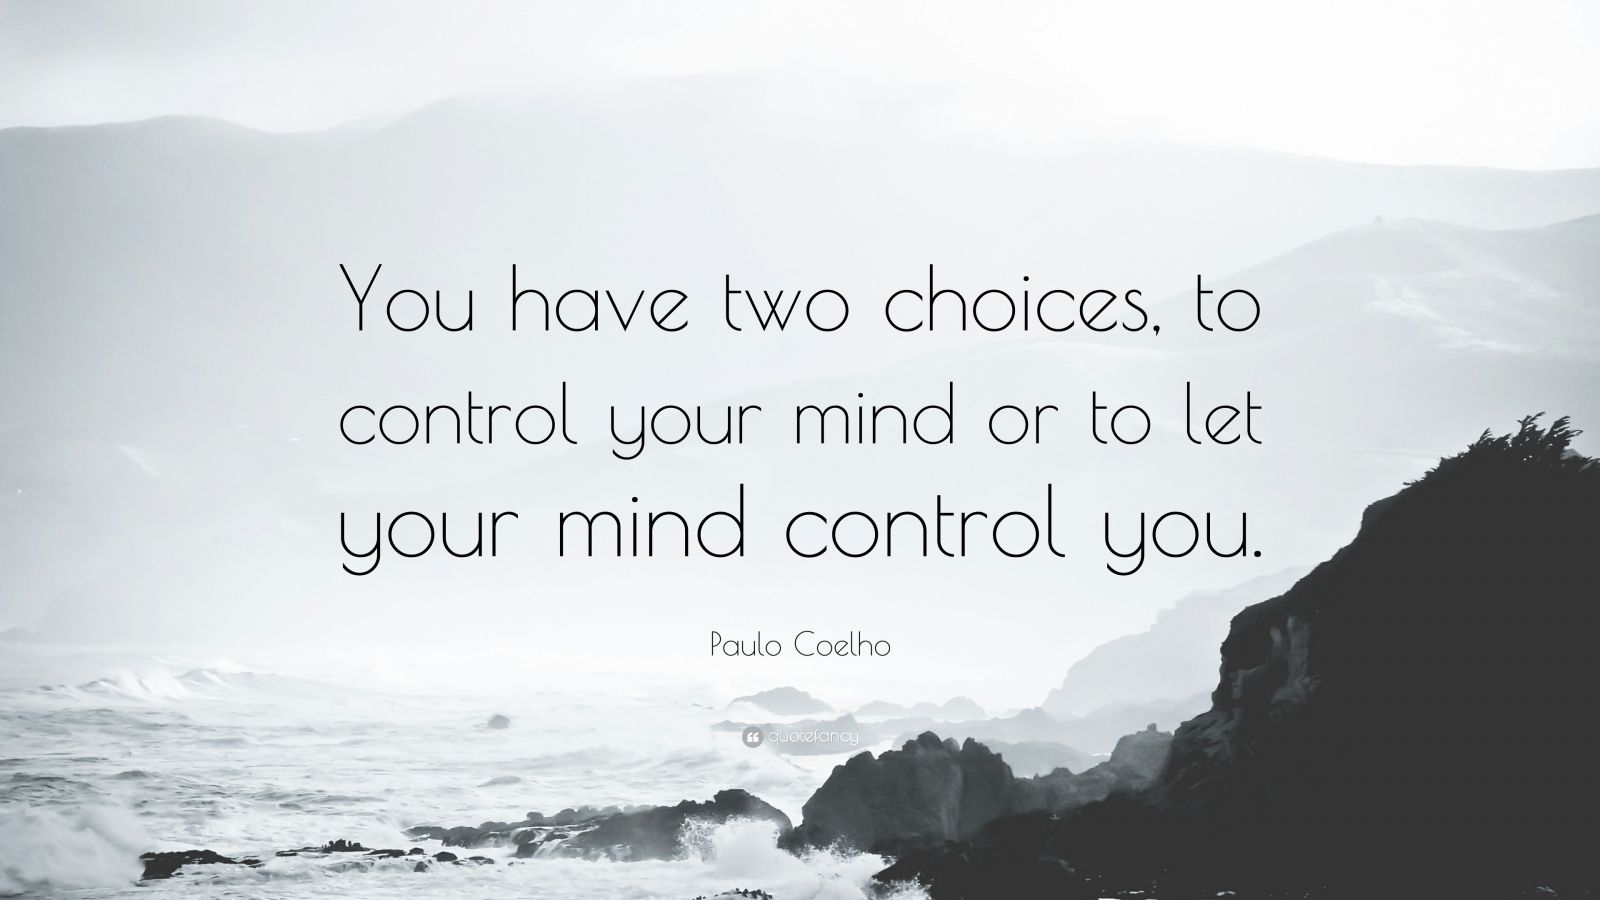 Paulo Coelho Quote: “You have two choices, to control your mind or to let your mind control you.”